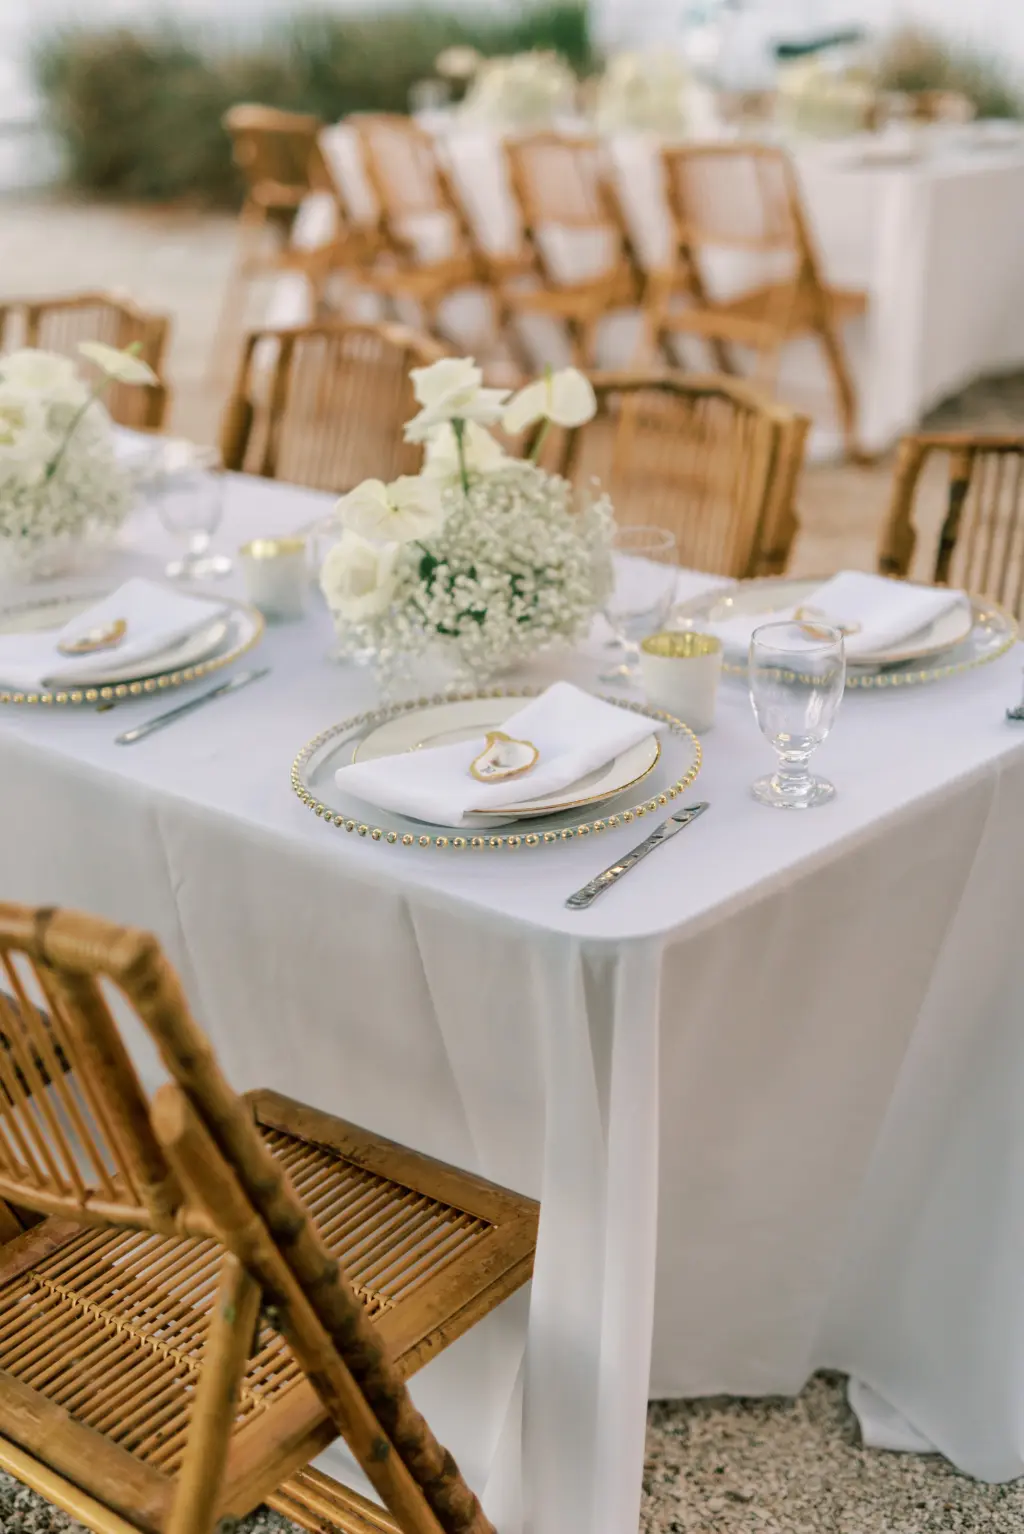 Oyster Place Card Decor Inspiration | Blue, Gold, and Cream Coastal Boho Wedding Reception Tablesetting with Wooden Bamboo Rattan Chair Ideas